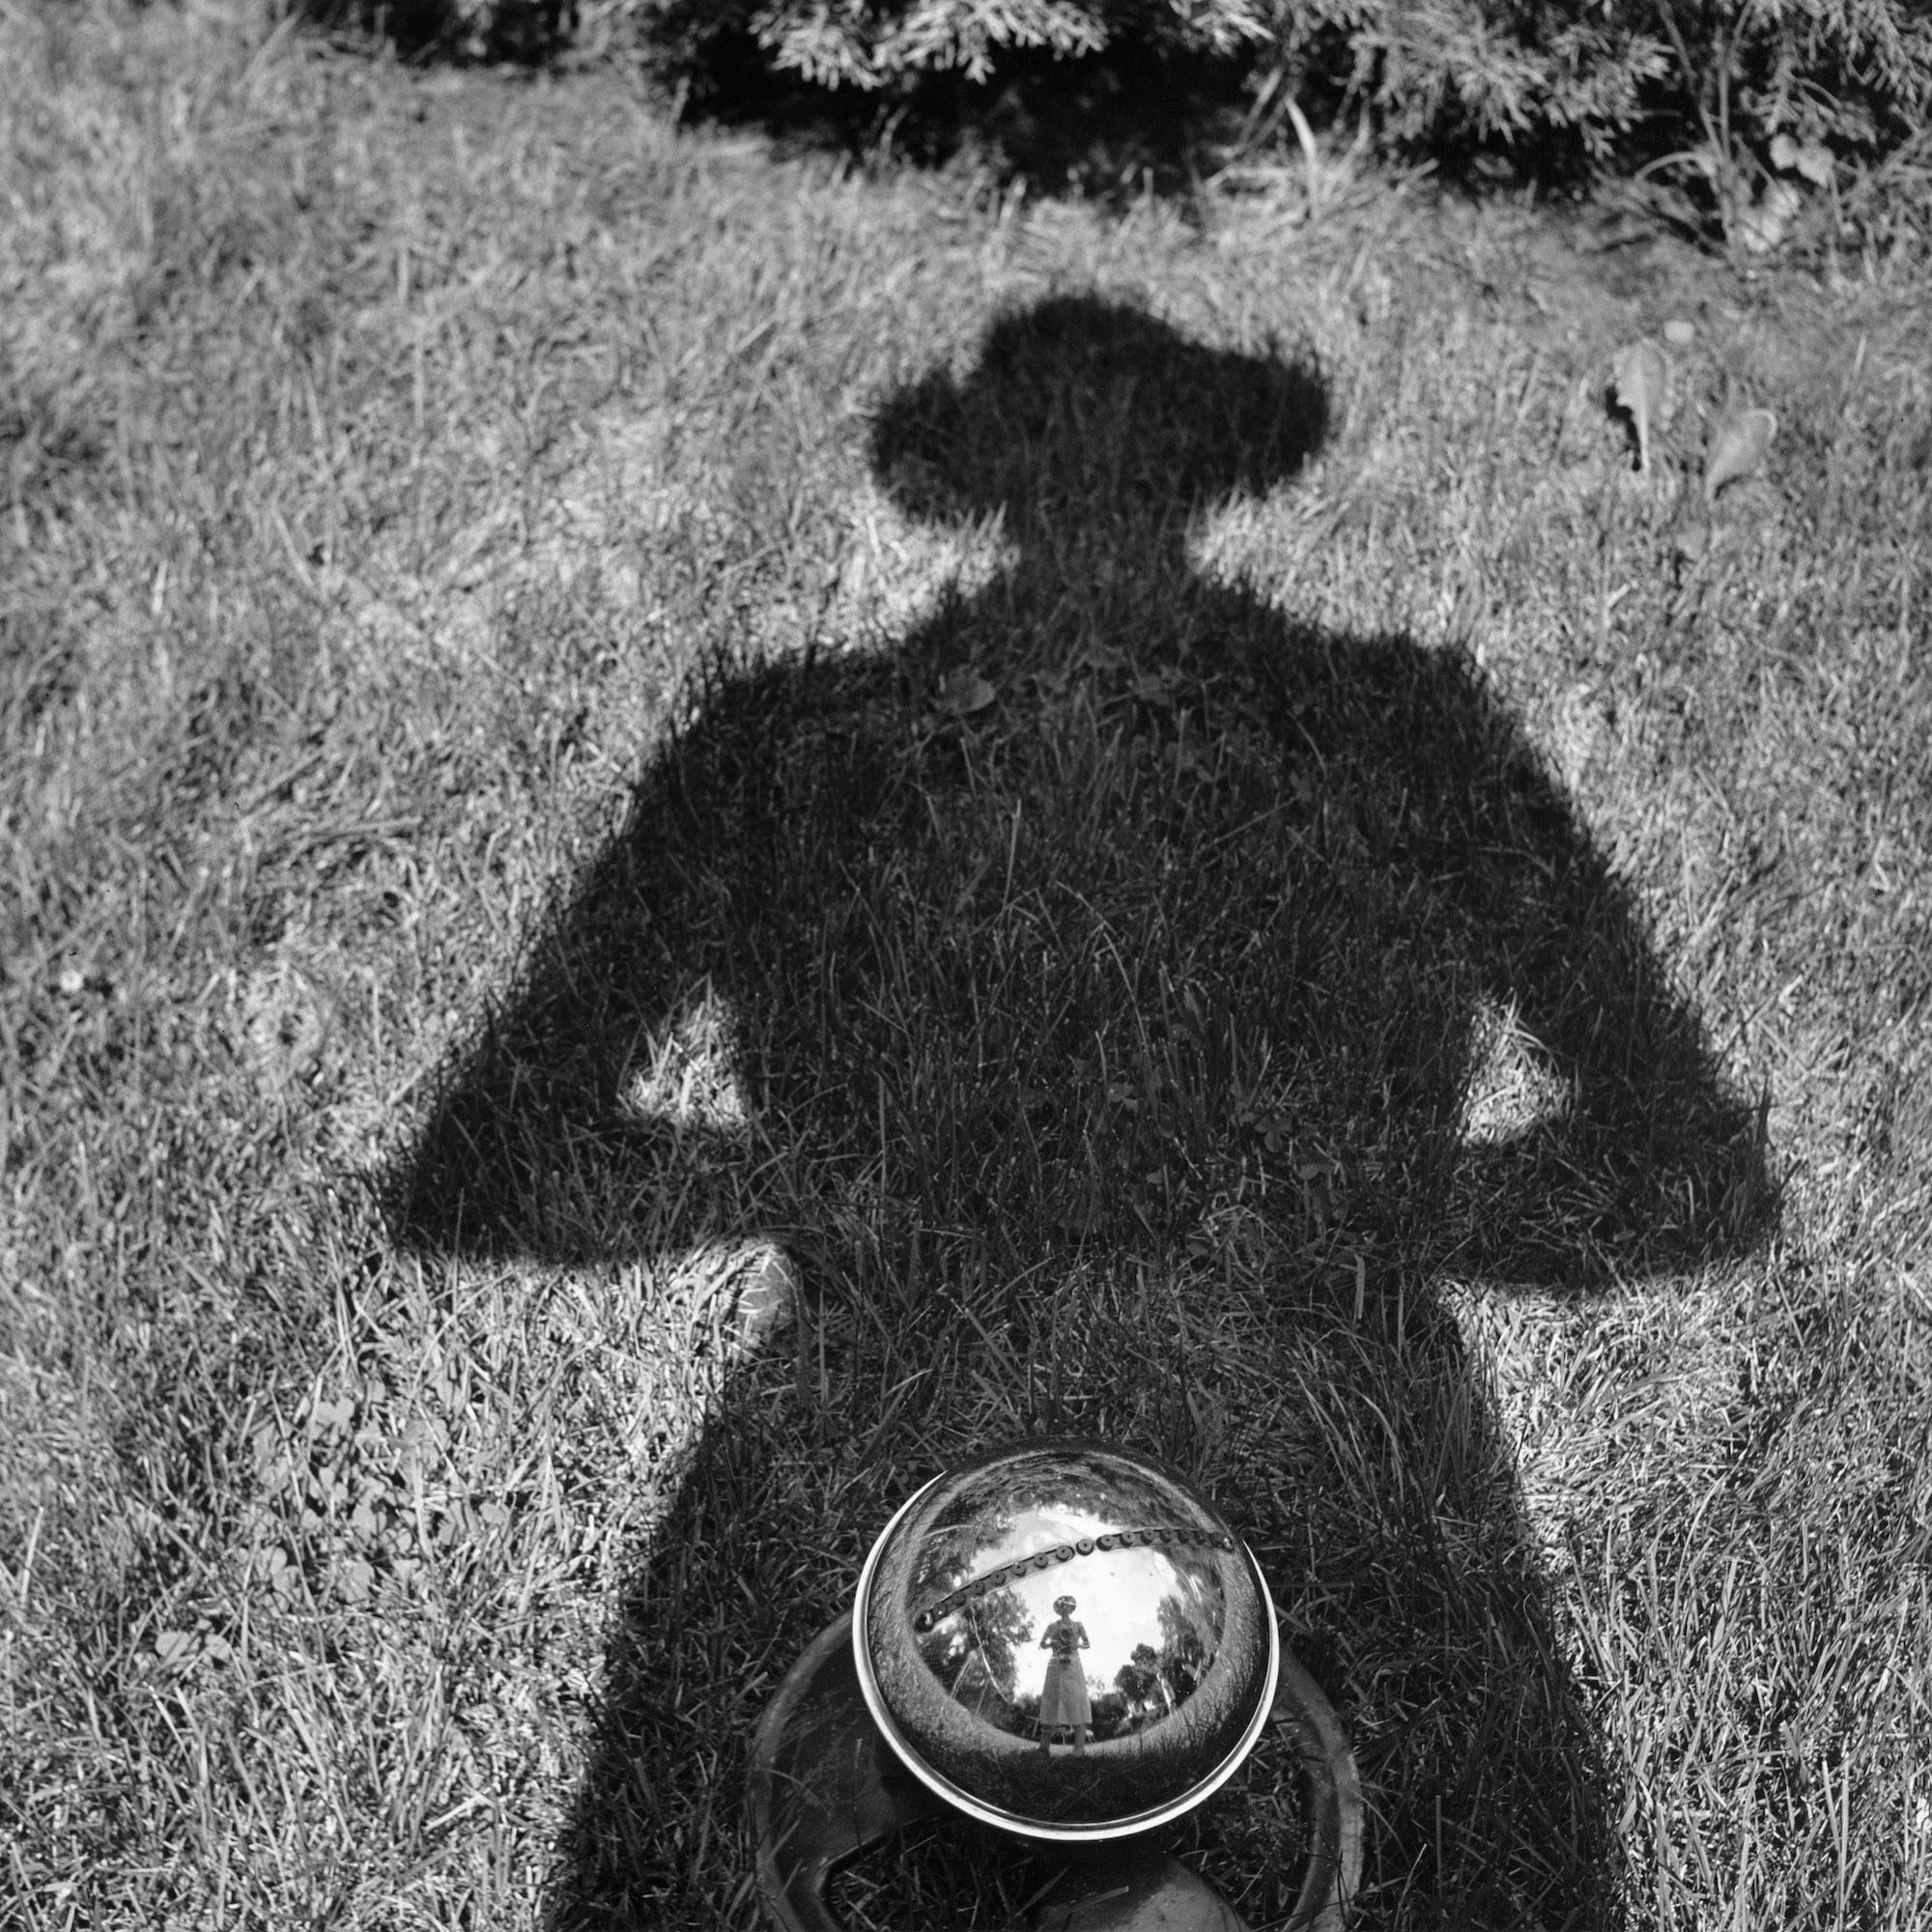 Vivian Maier, Self Portrait, not dated Copyright Estate of Vivian Maier Courtesy of Maloof Collection and Howard Greenberg Gallery NY